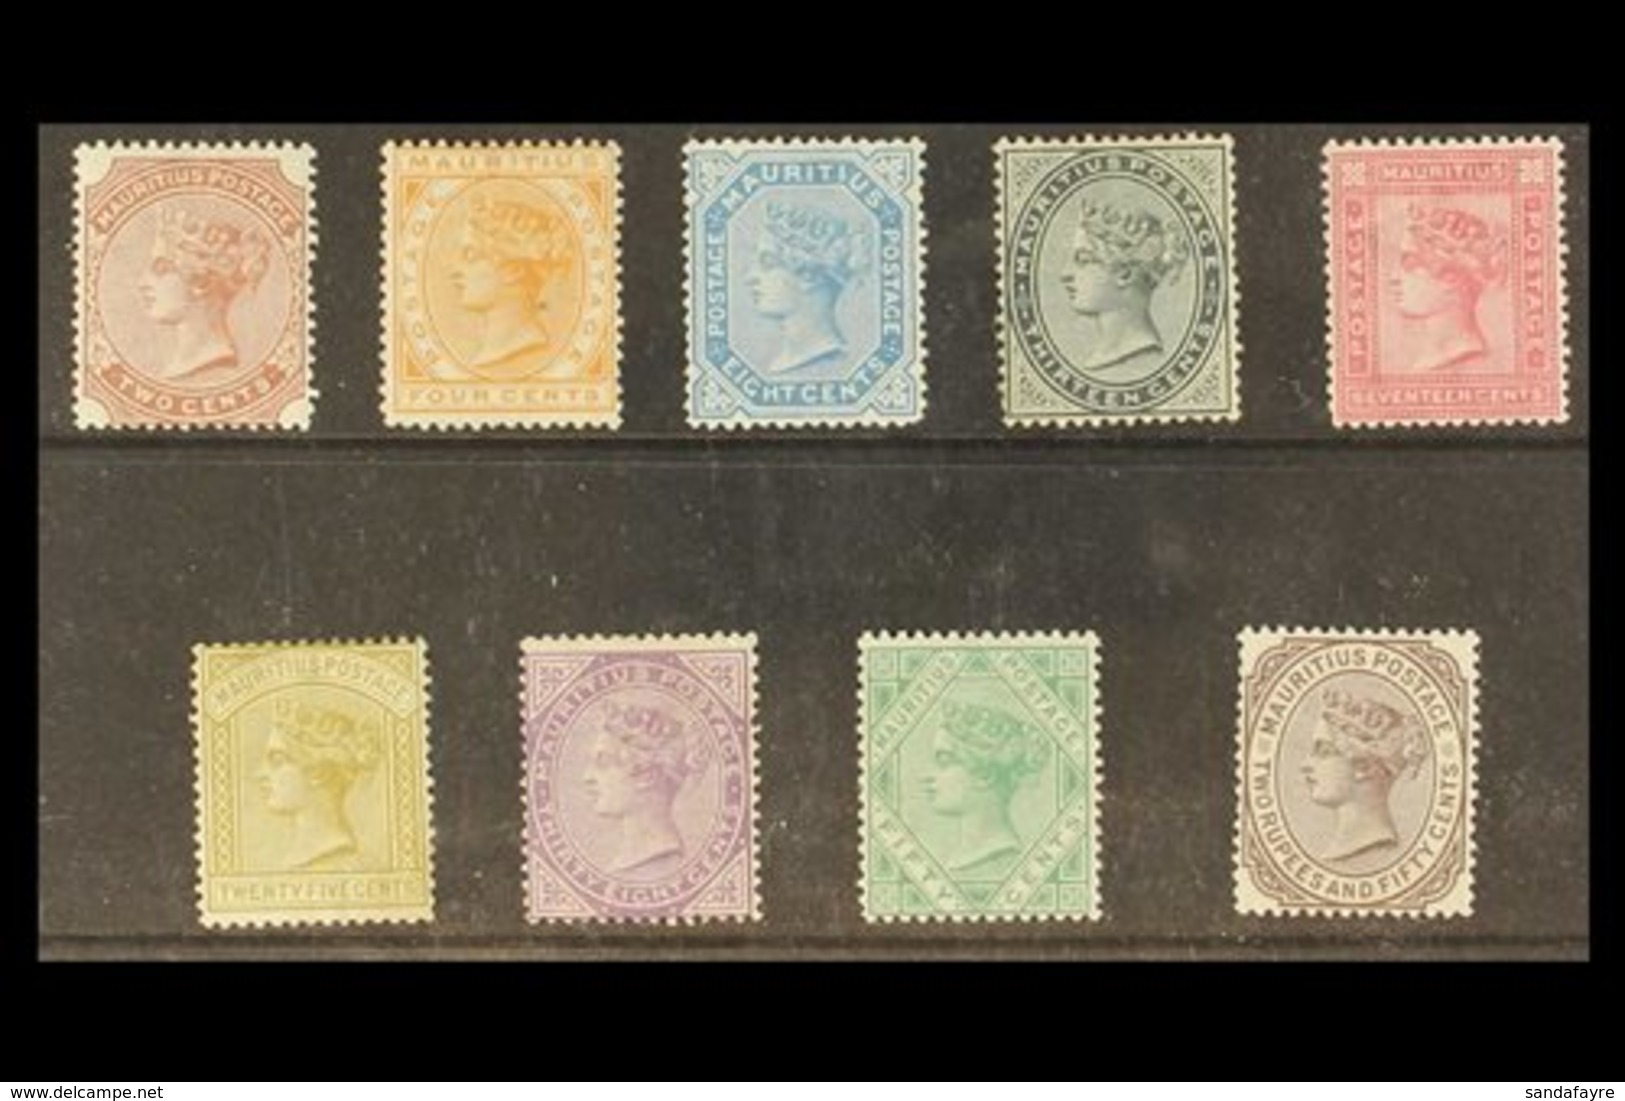 1879 2c To 2r 50 Queen Victoria Set Complete, Wmk Crown CC, SG 92/100, Very Fine And Fresh Mint. Scarce And Lovely Set.  - Mauritius (...-1967)